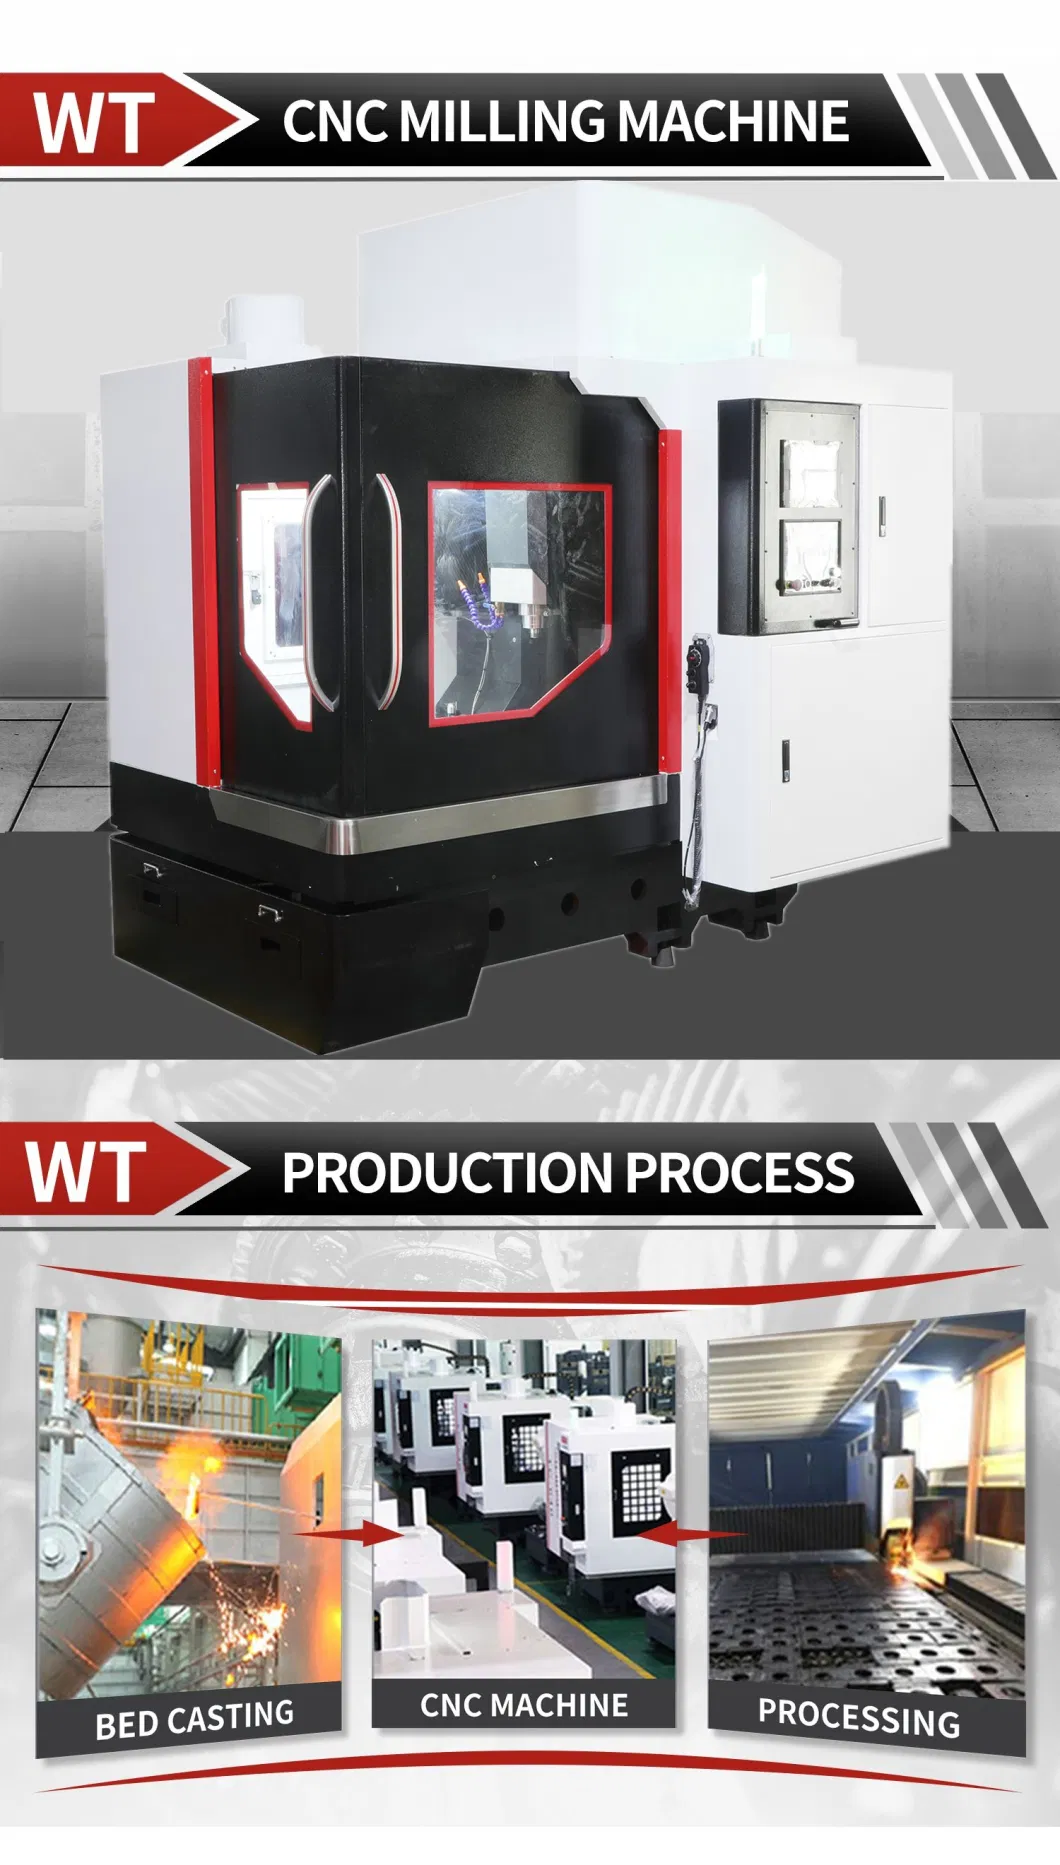 Small CNC Machine Center 3 Axis CNC Milling Machine Processing for Metal Machining Mould CNC Milling Engraving Machine